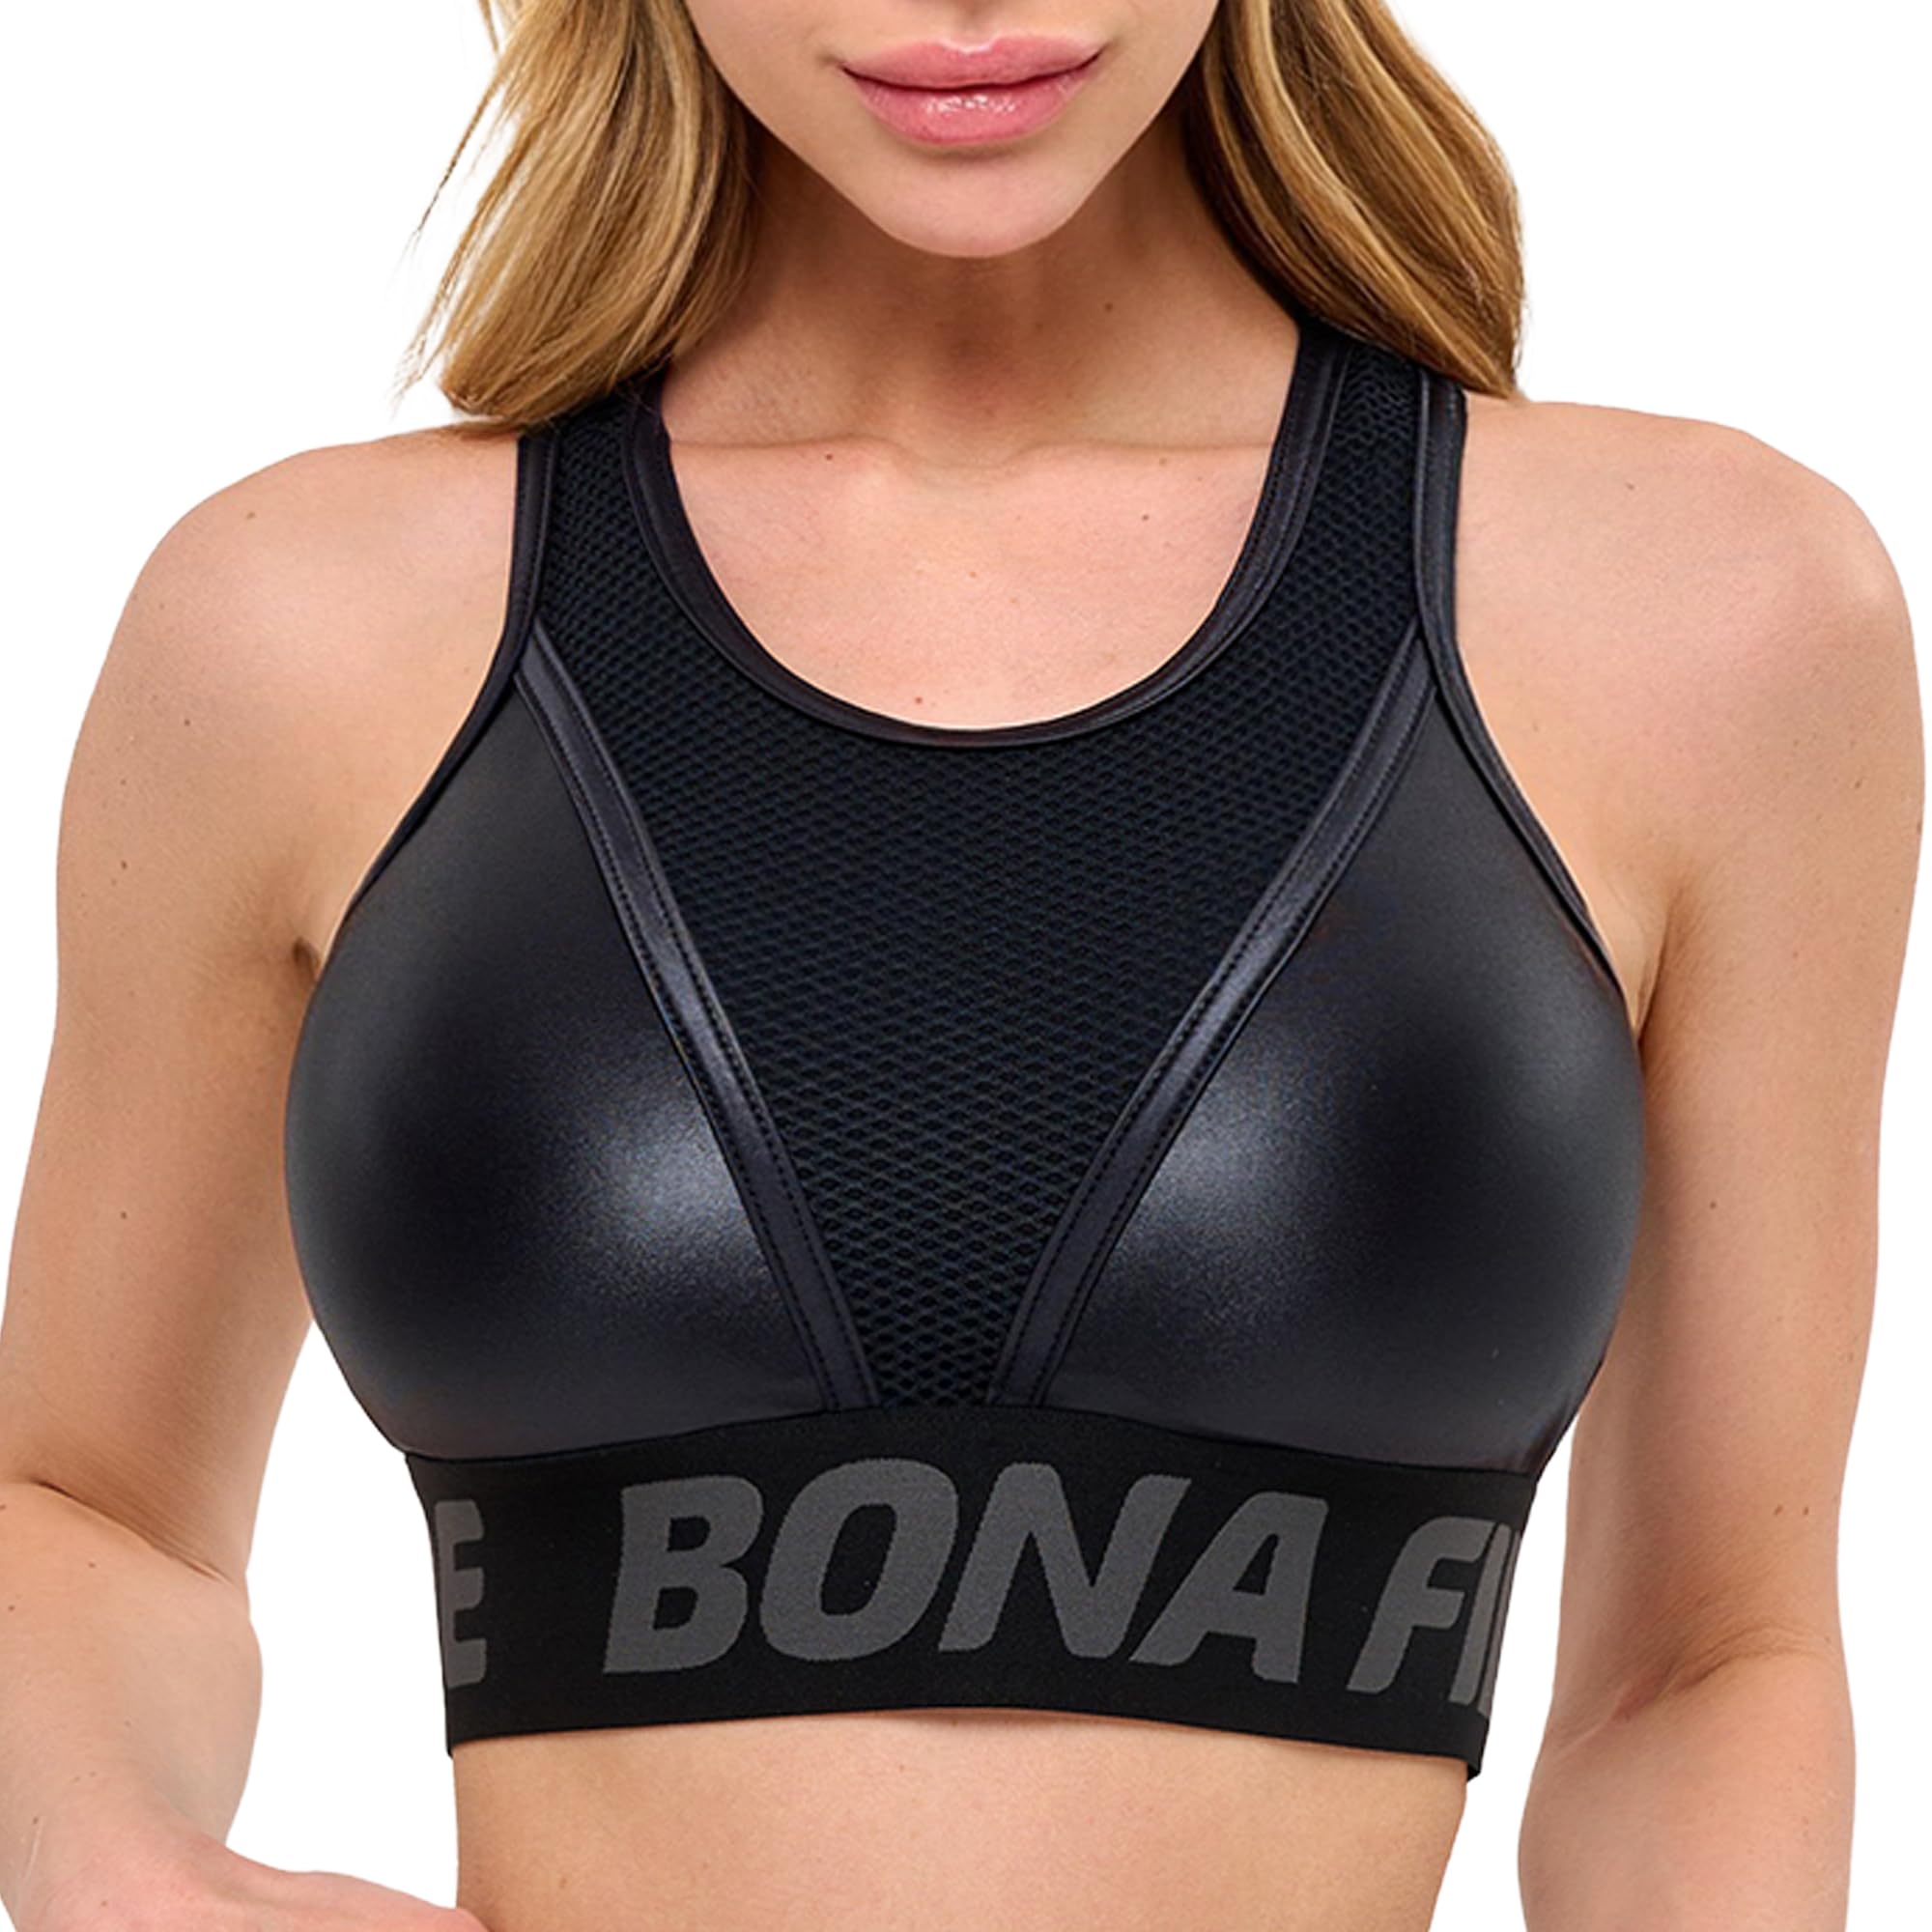 Bona Fide Sport Bras for Women - High Impact Sports Bras with High Support for Womens - Designed for Gym Running and Fitness